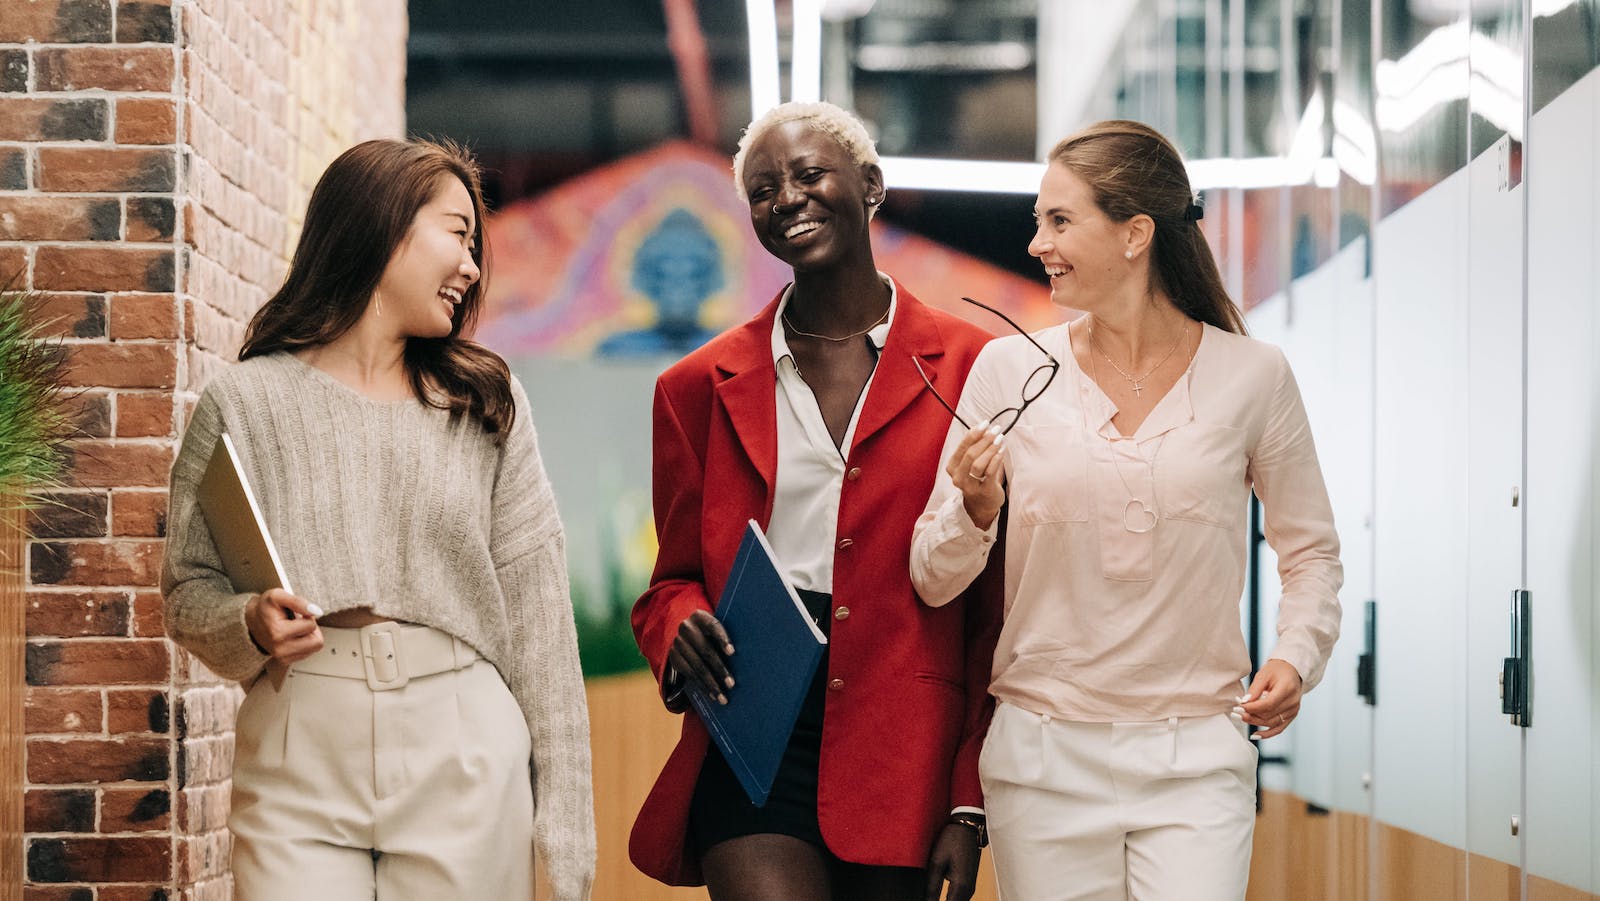 businesswomen smiling and walking together in modern workplace